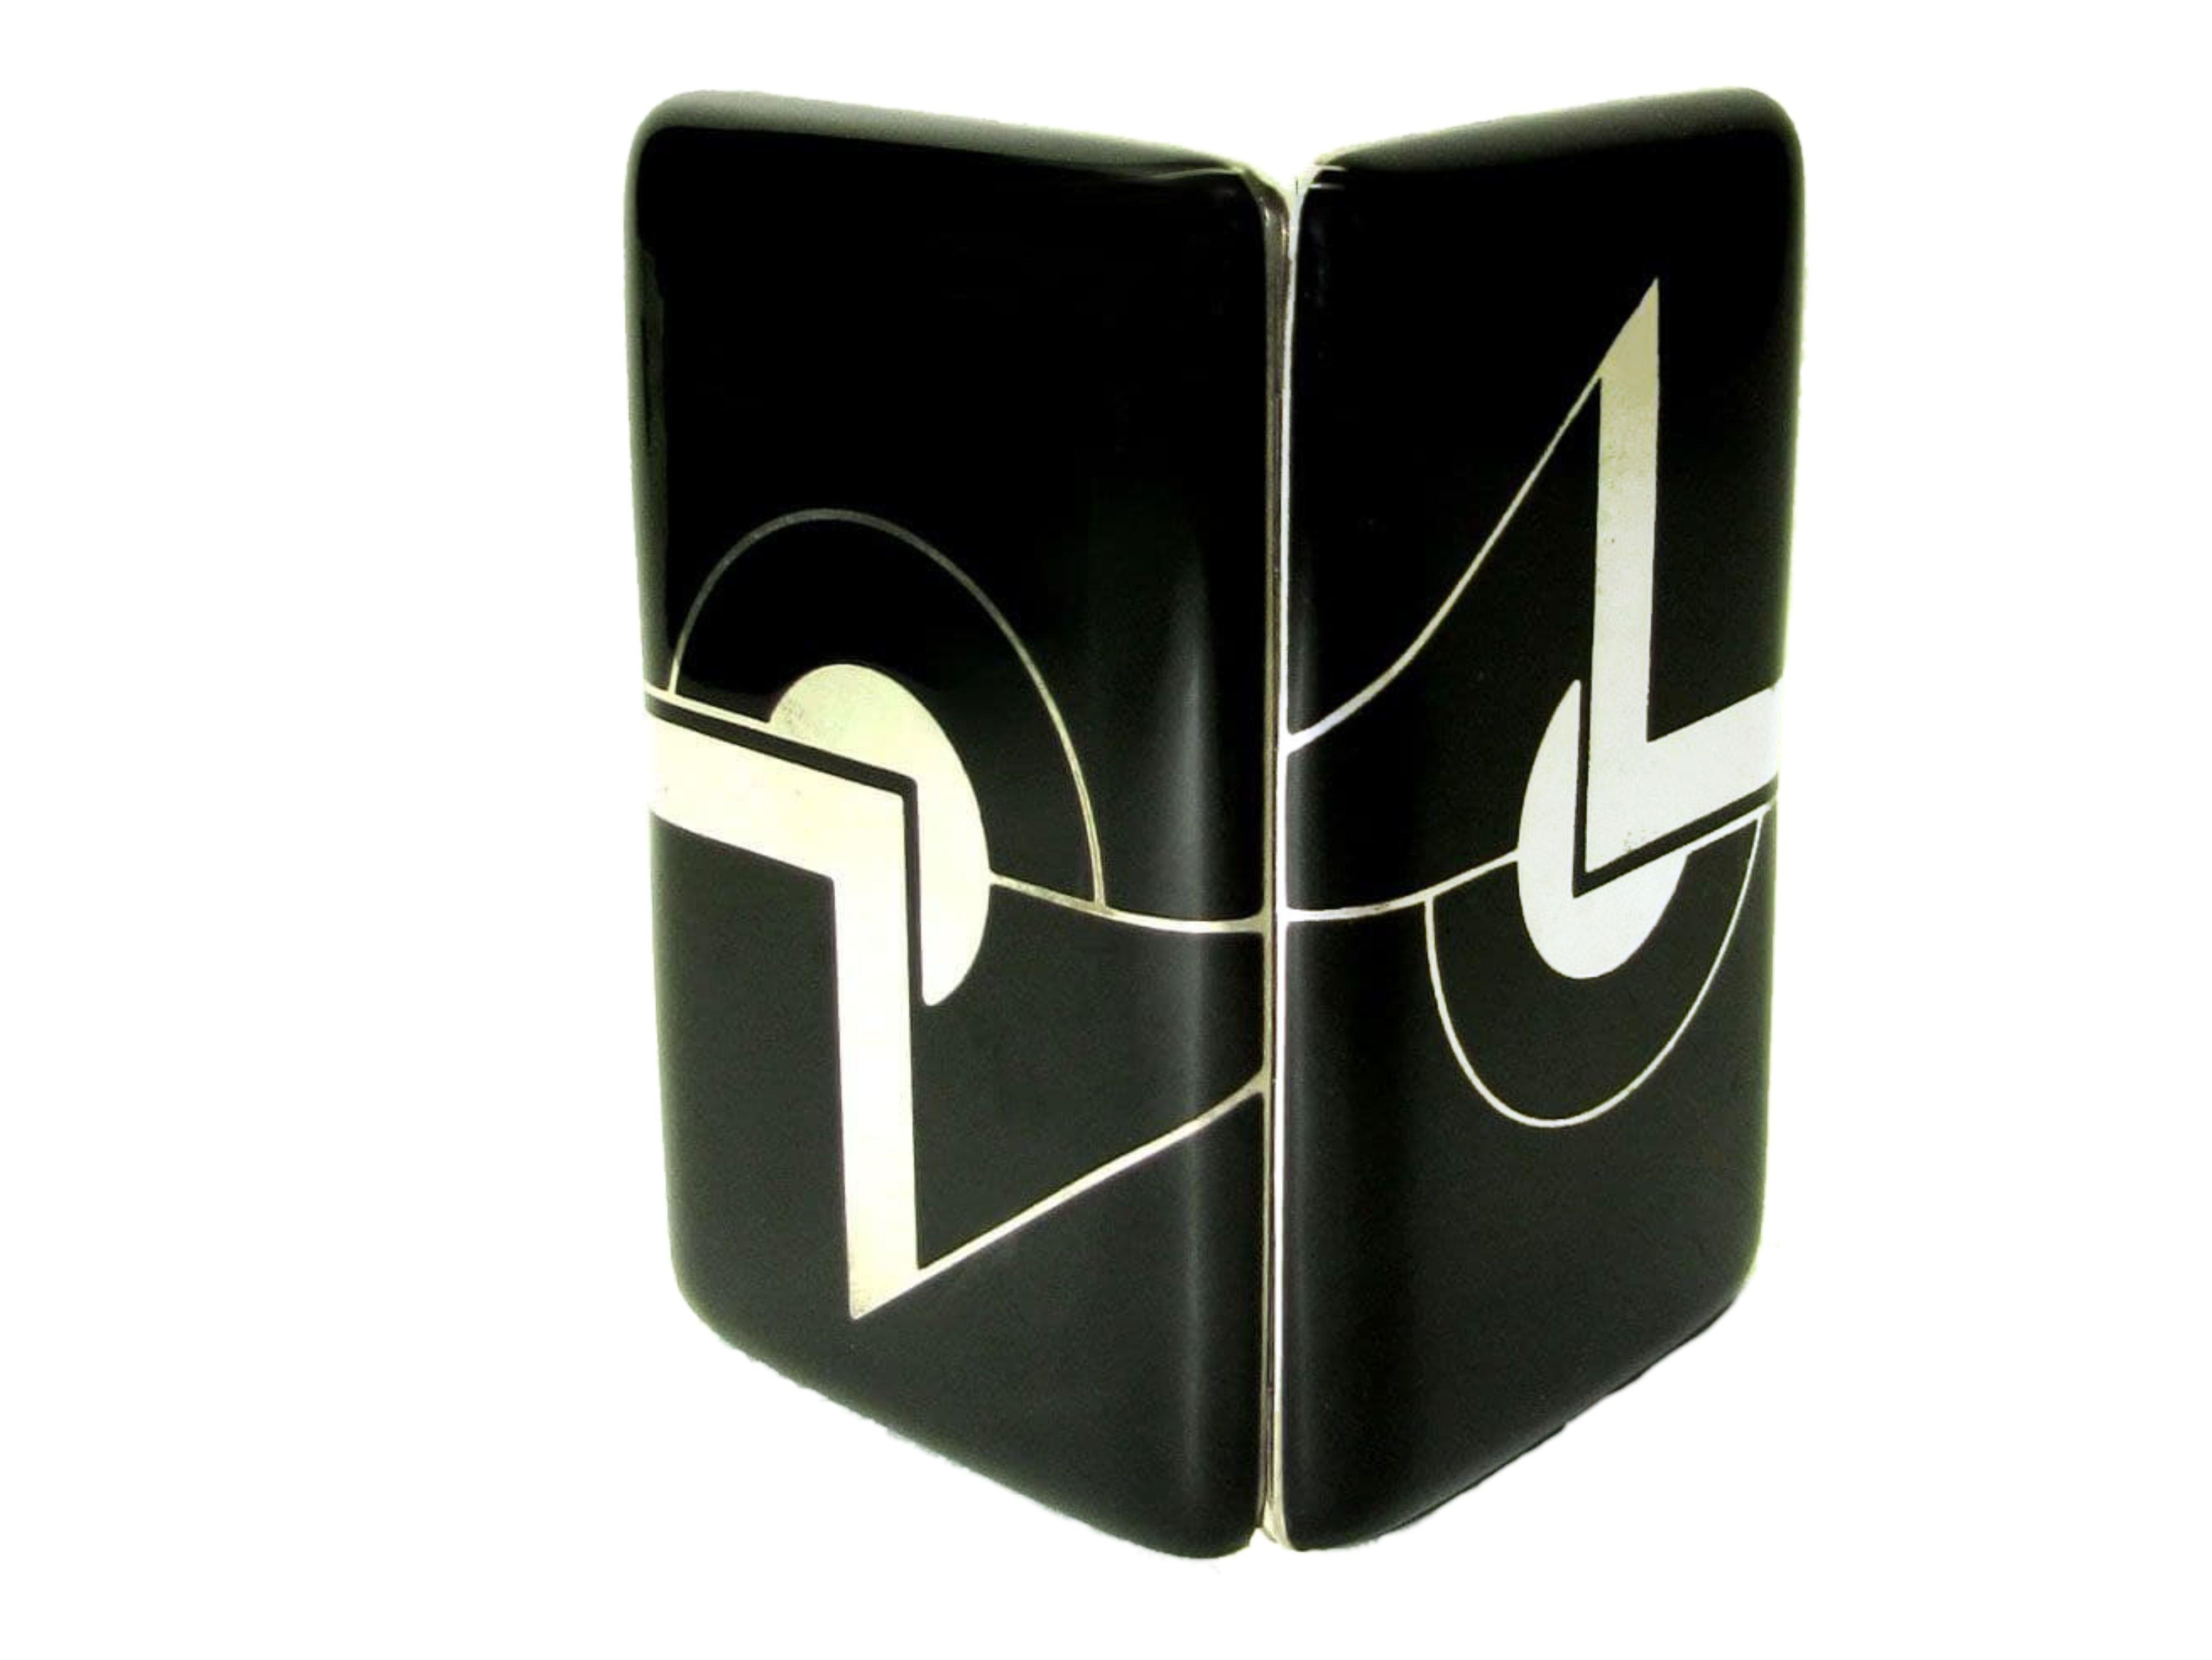 Cigarette case for handbag in 925/1000 sterling silver with black fired enamel. Opening with spring button. Size cm. 6.3 x 9.7 x 1.5 . Created in Art Deco style for Cartier USA in the 1980s, inspired by designs by Louis Cartier from the early